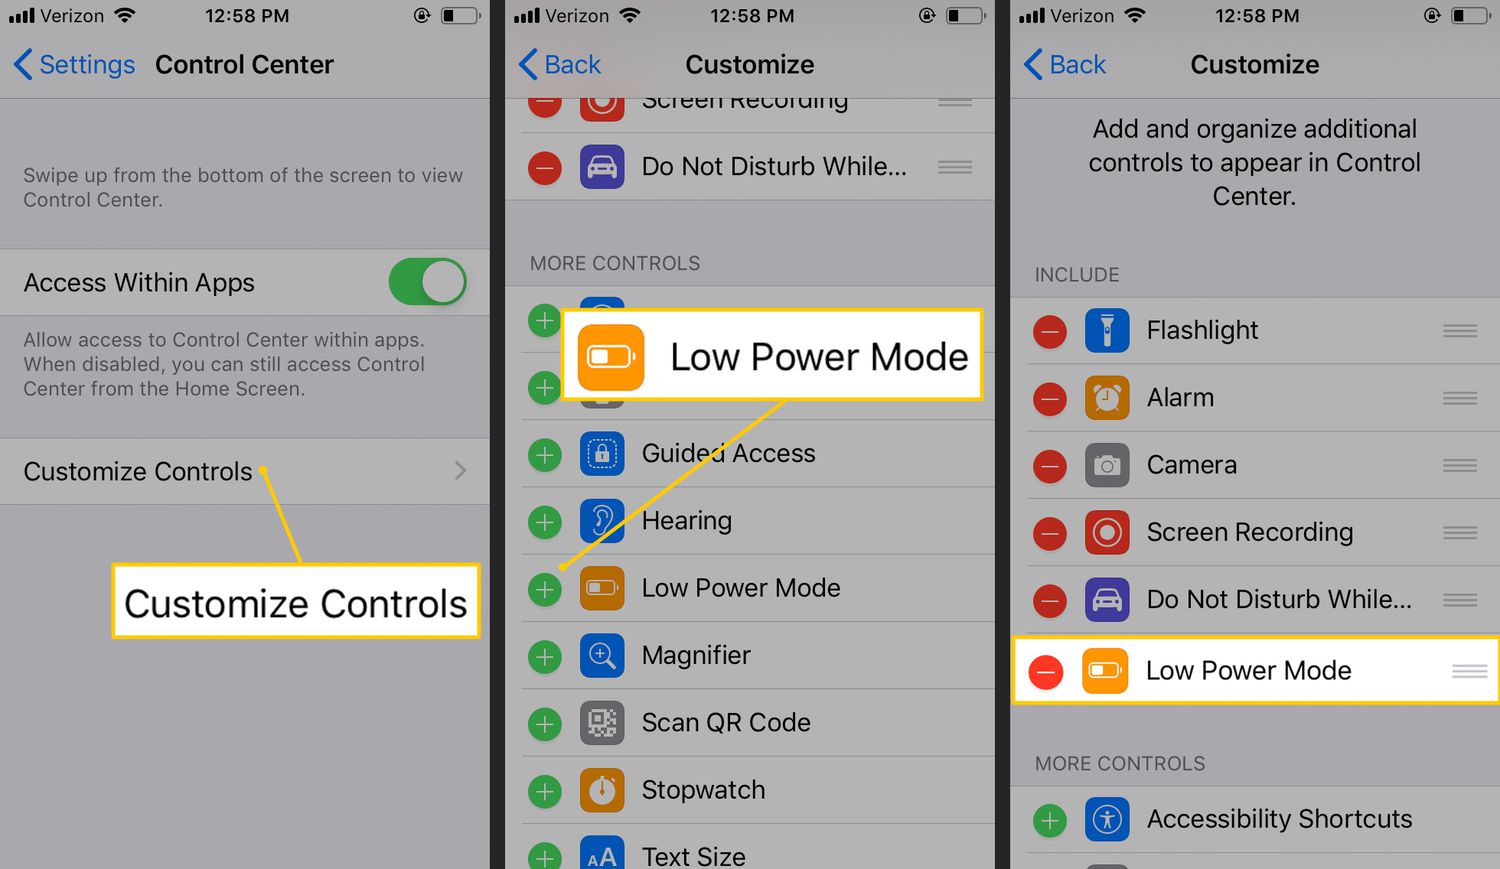 how-to-add-low-power-mode-to-control-center-with-ios-11-on-iphone